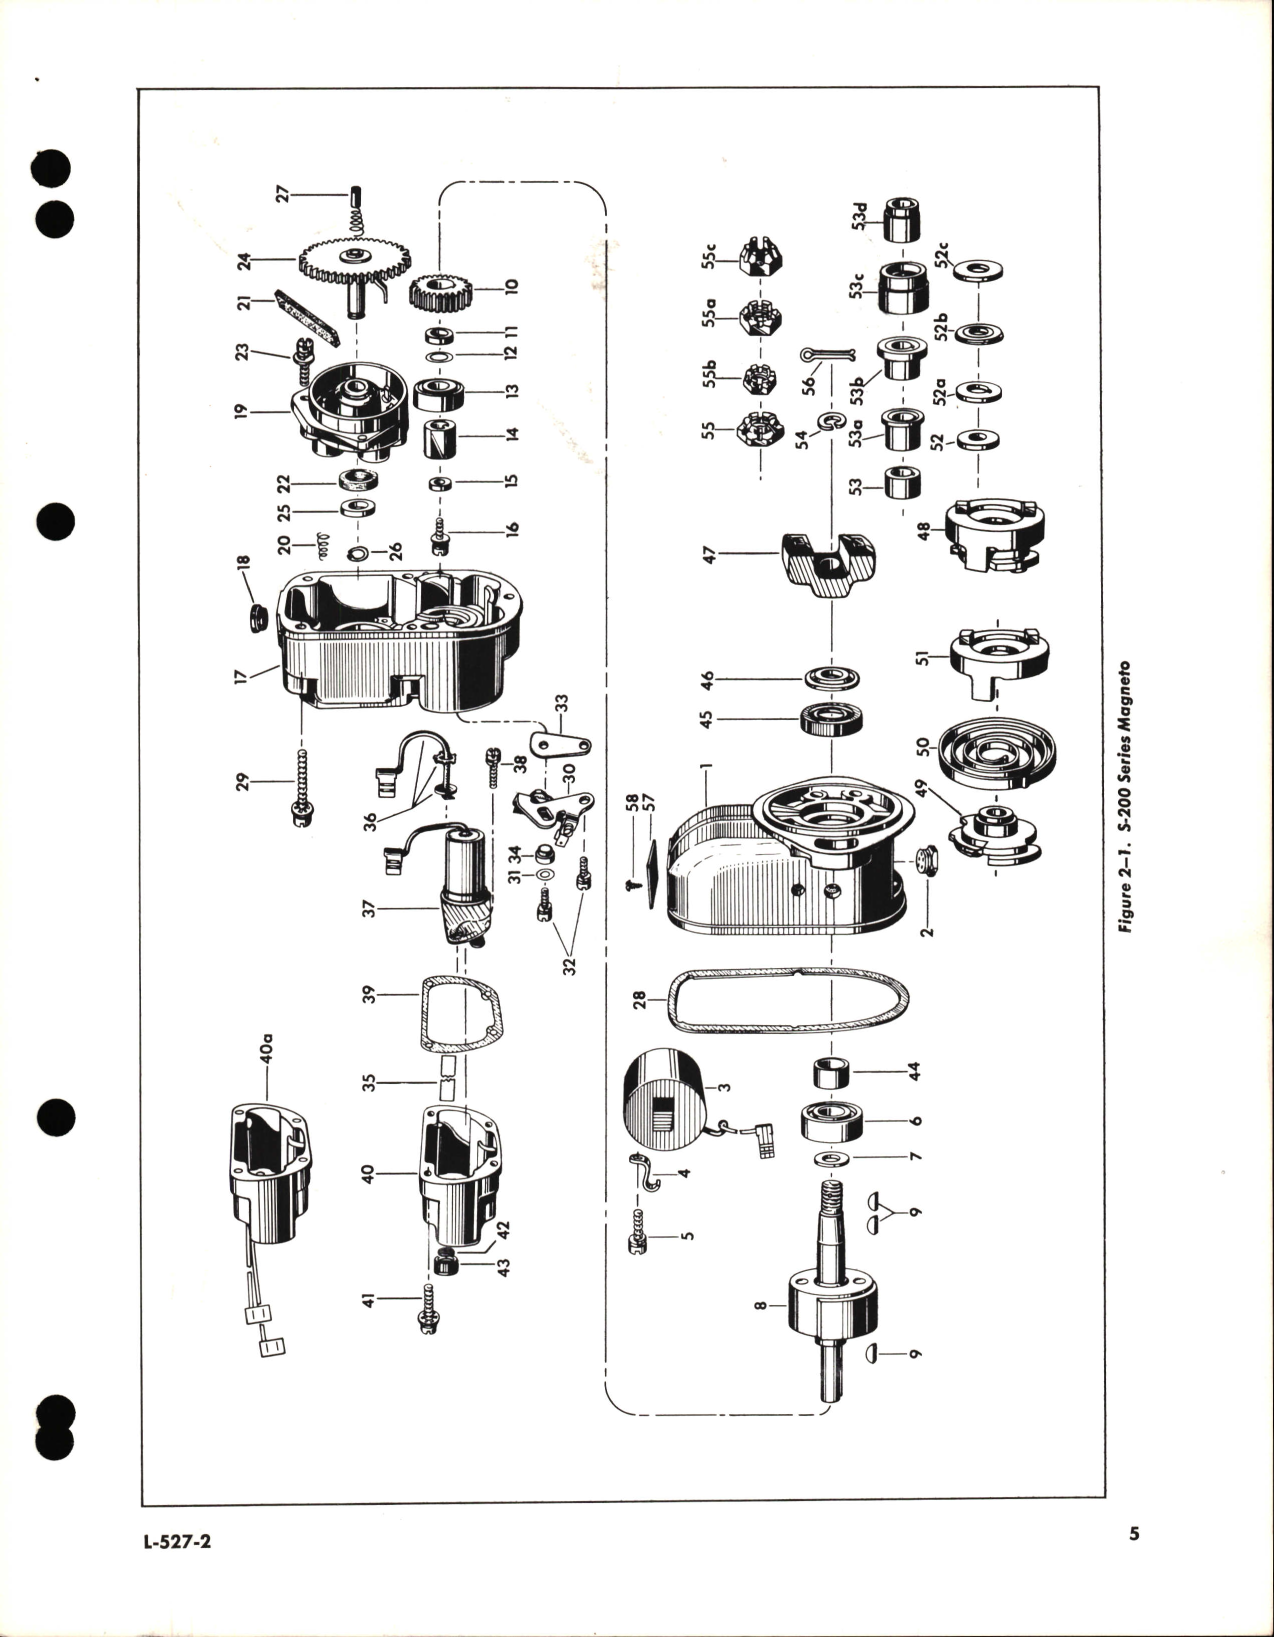 Sample page 5 from AirCorps Library document: Overhaul Instructions for S-200 Series Aircraft Magnetos